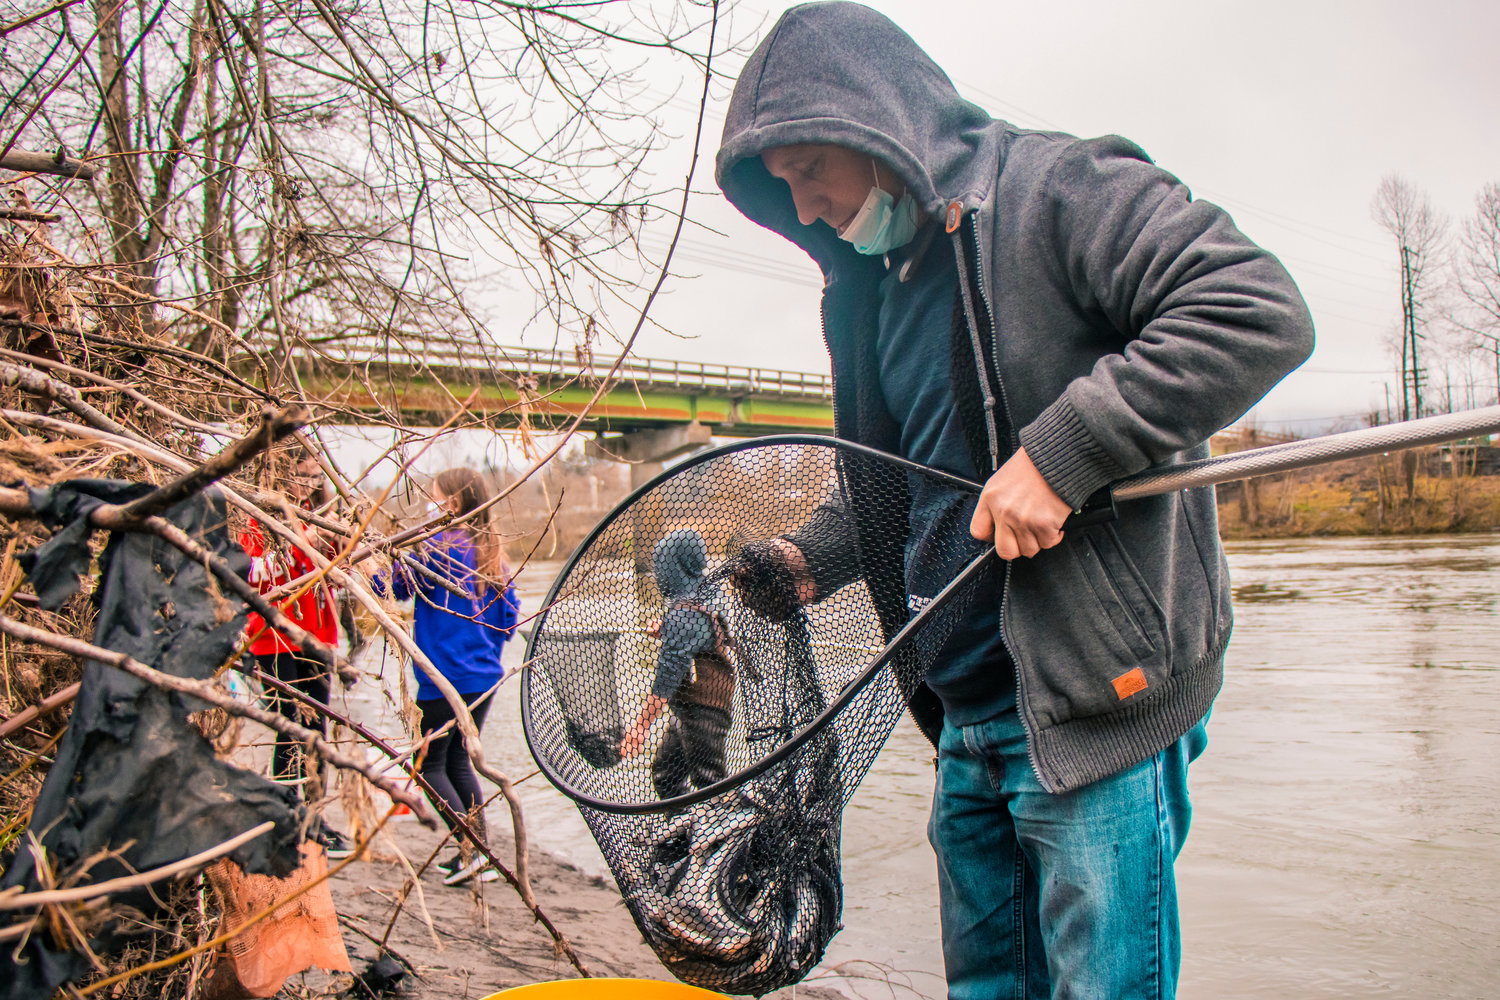 Nets full of fish are carried to buckets during a smelt dip along the Cowlitz River in Castle Rock on Tuesday.